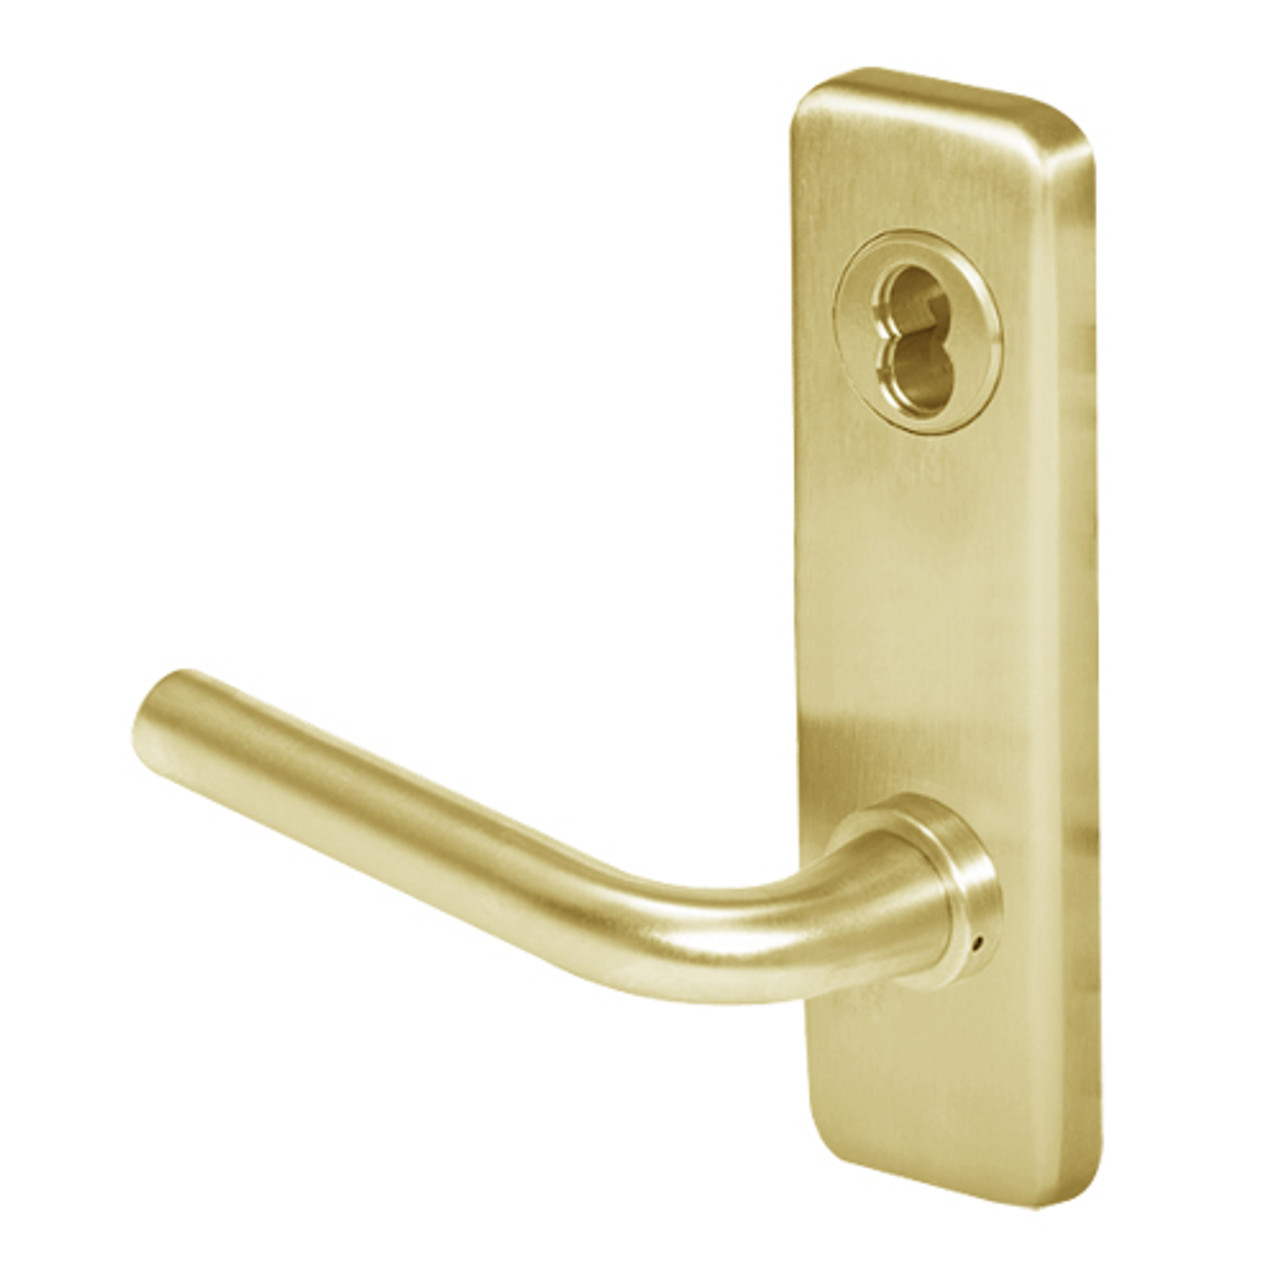 45H0LB12J606 Best 40H Series Privacy with Deadbolt Heavy Duty Mortise Lever Lock with Solid Tube with No Return in Satin Brass